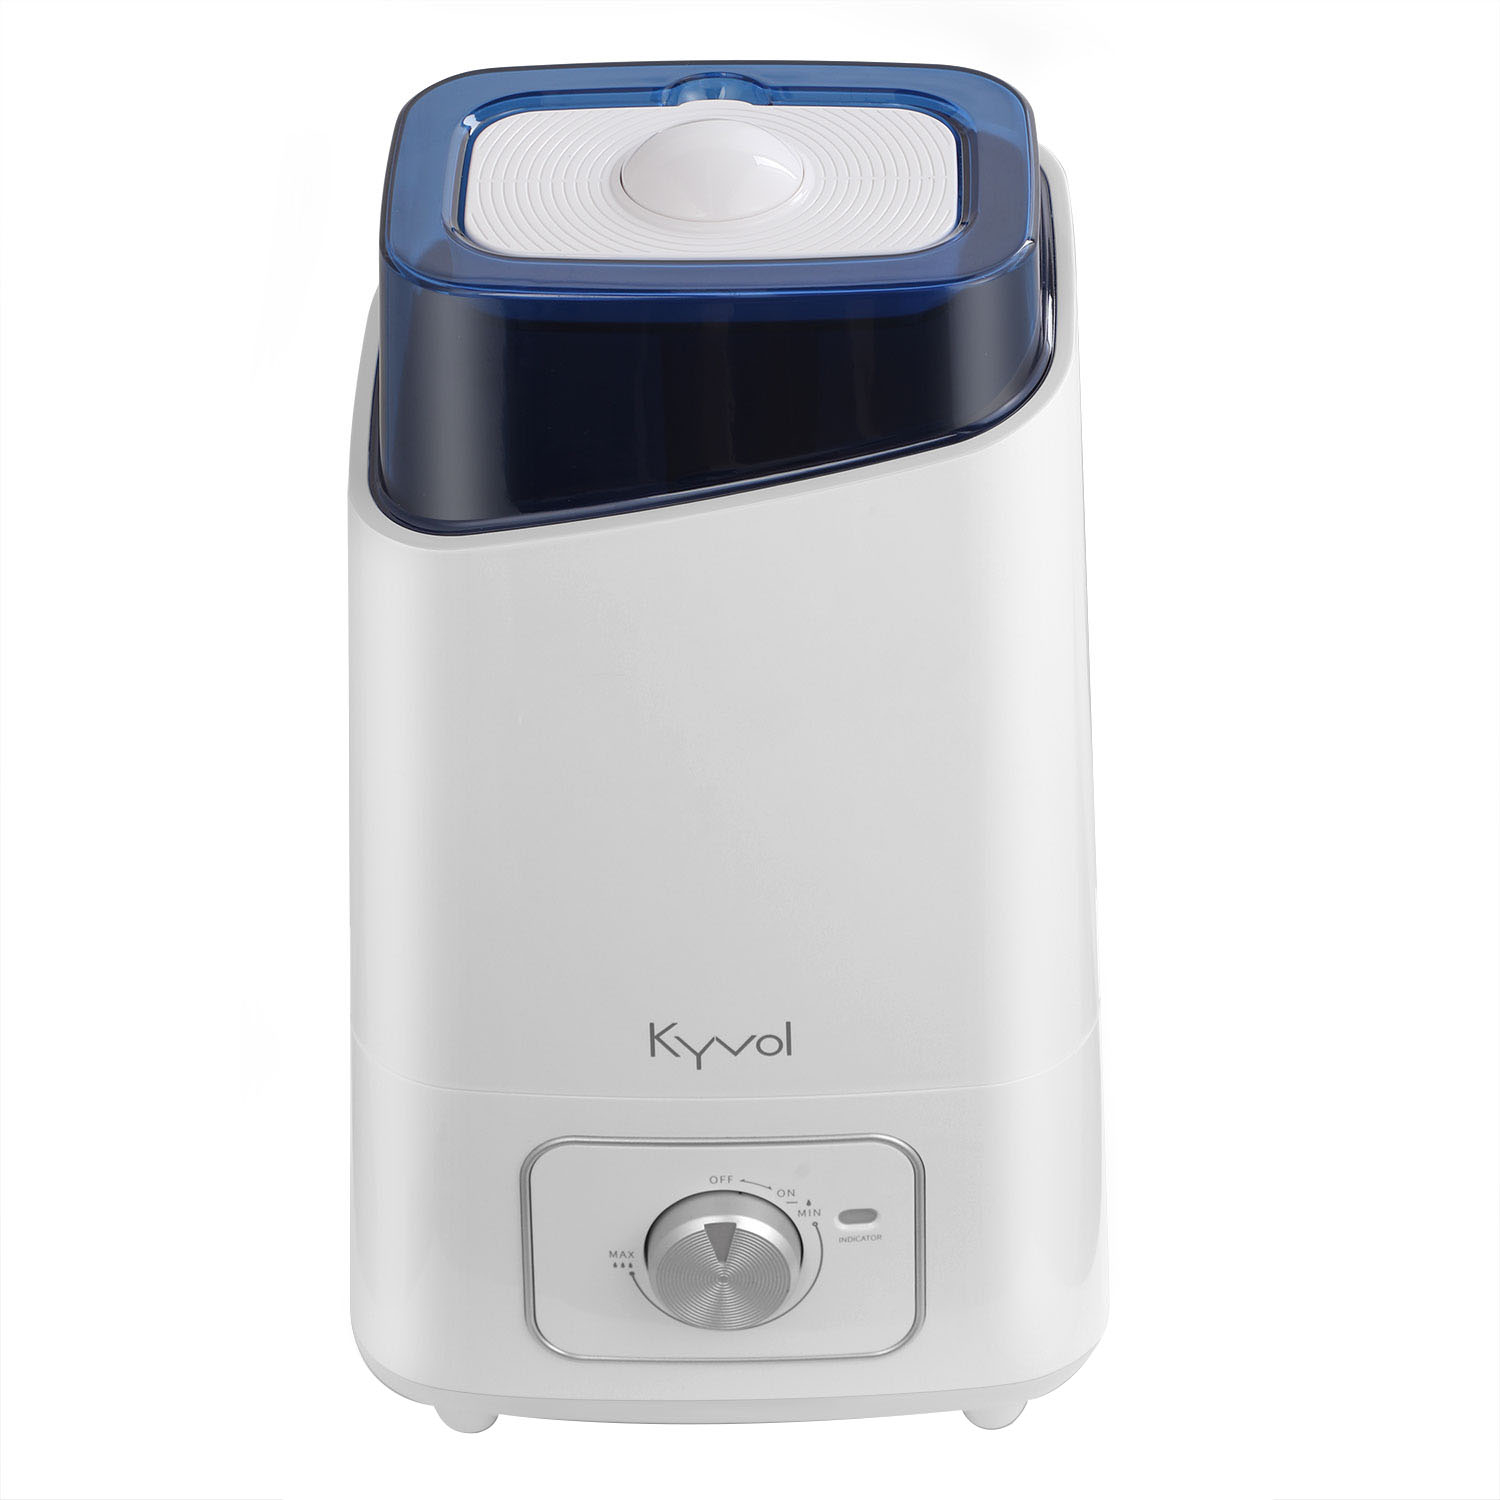 Homvana Humidifier 3L Ultrasonic - Overview and Review 